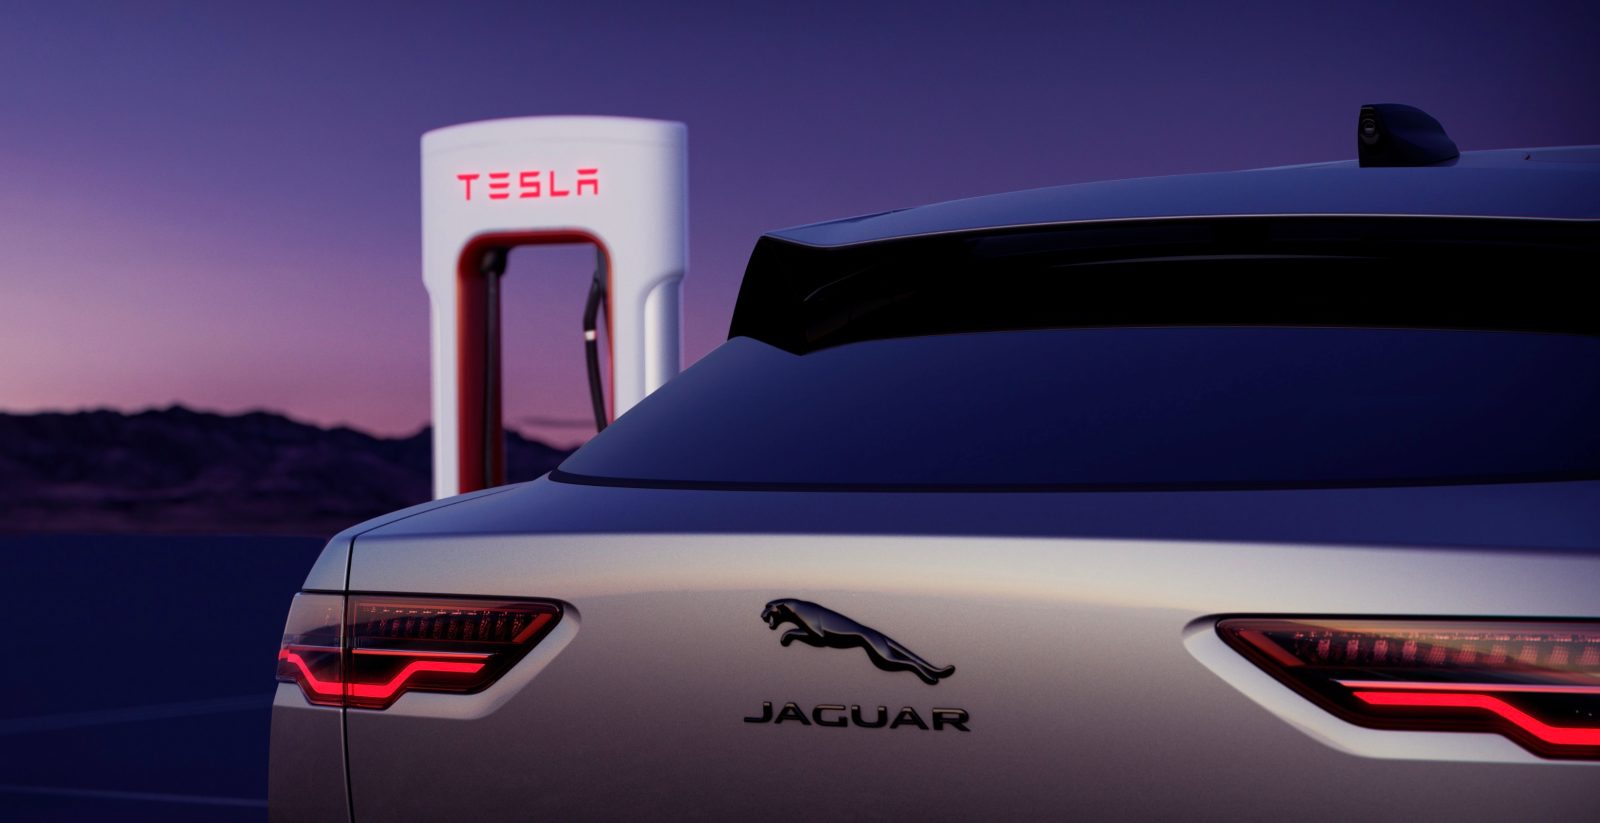 jaguar signs deal with tesla for supercharger access, will adopt nacs